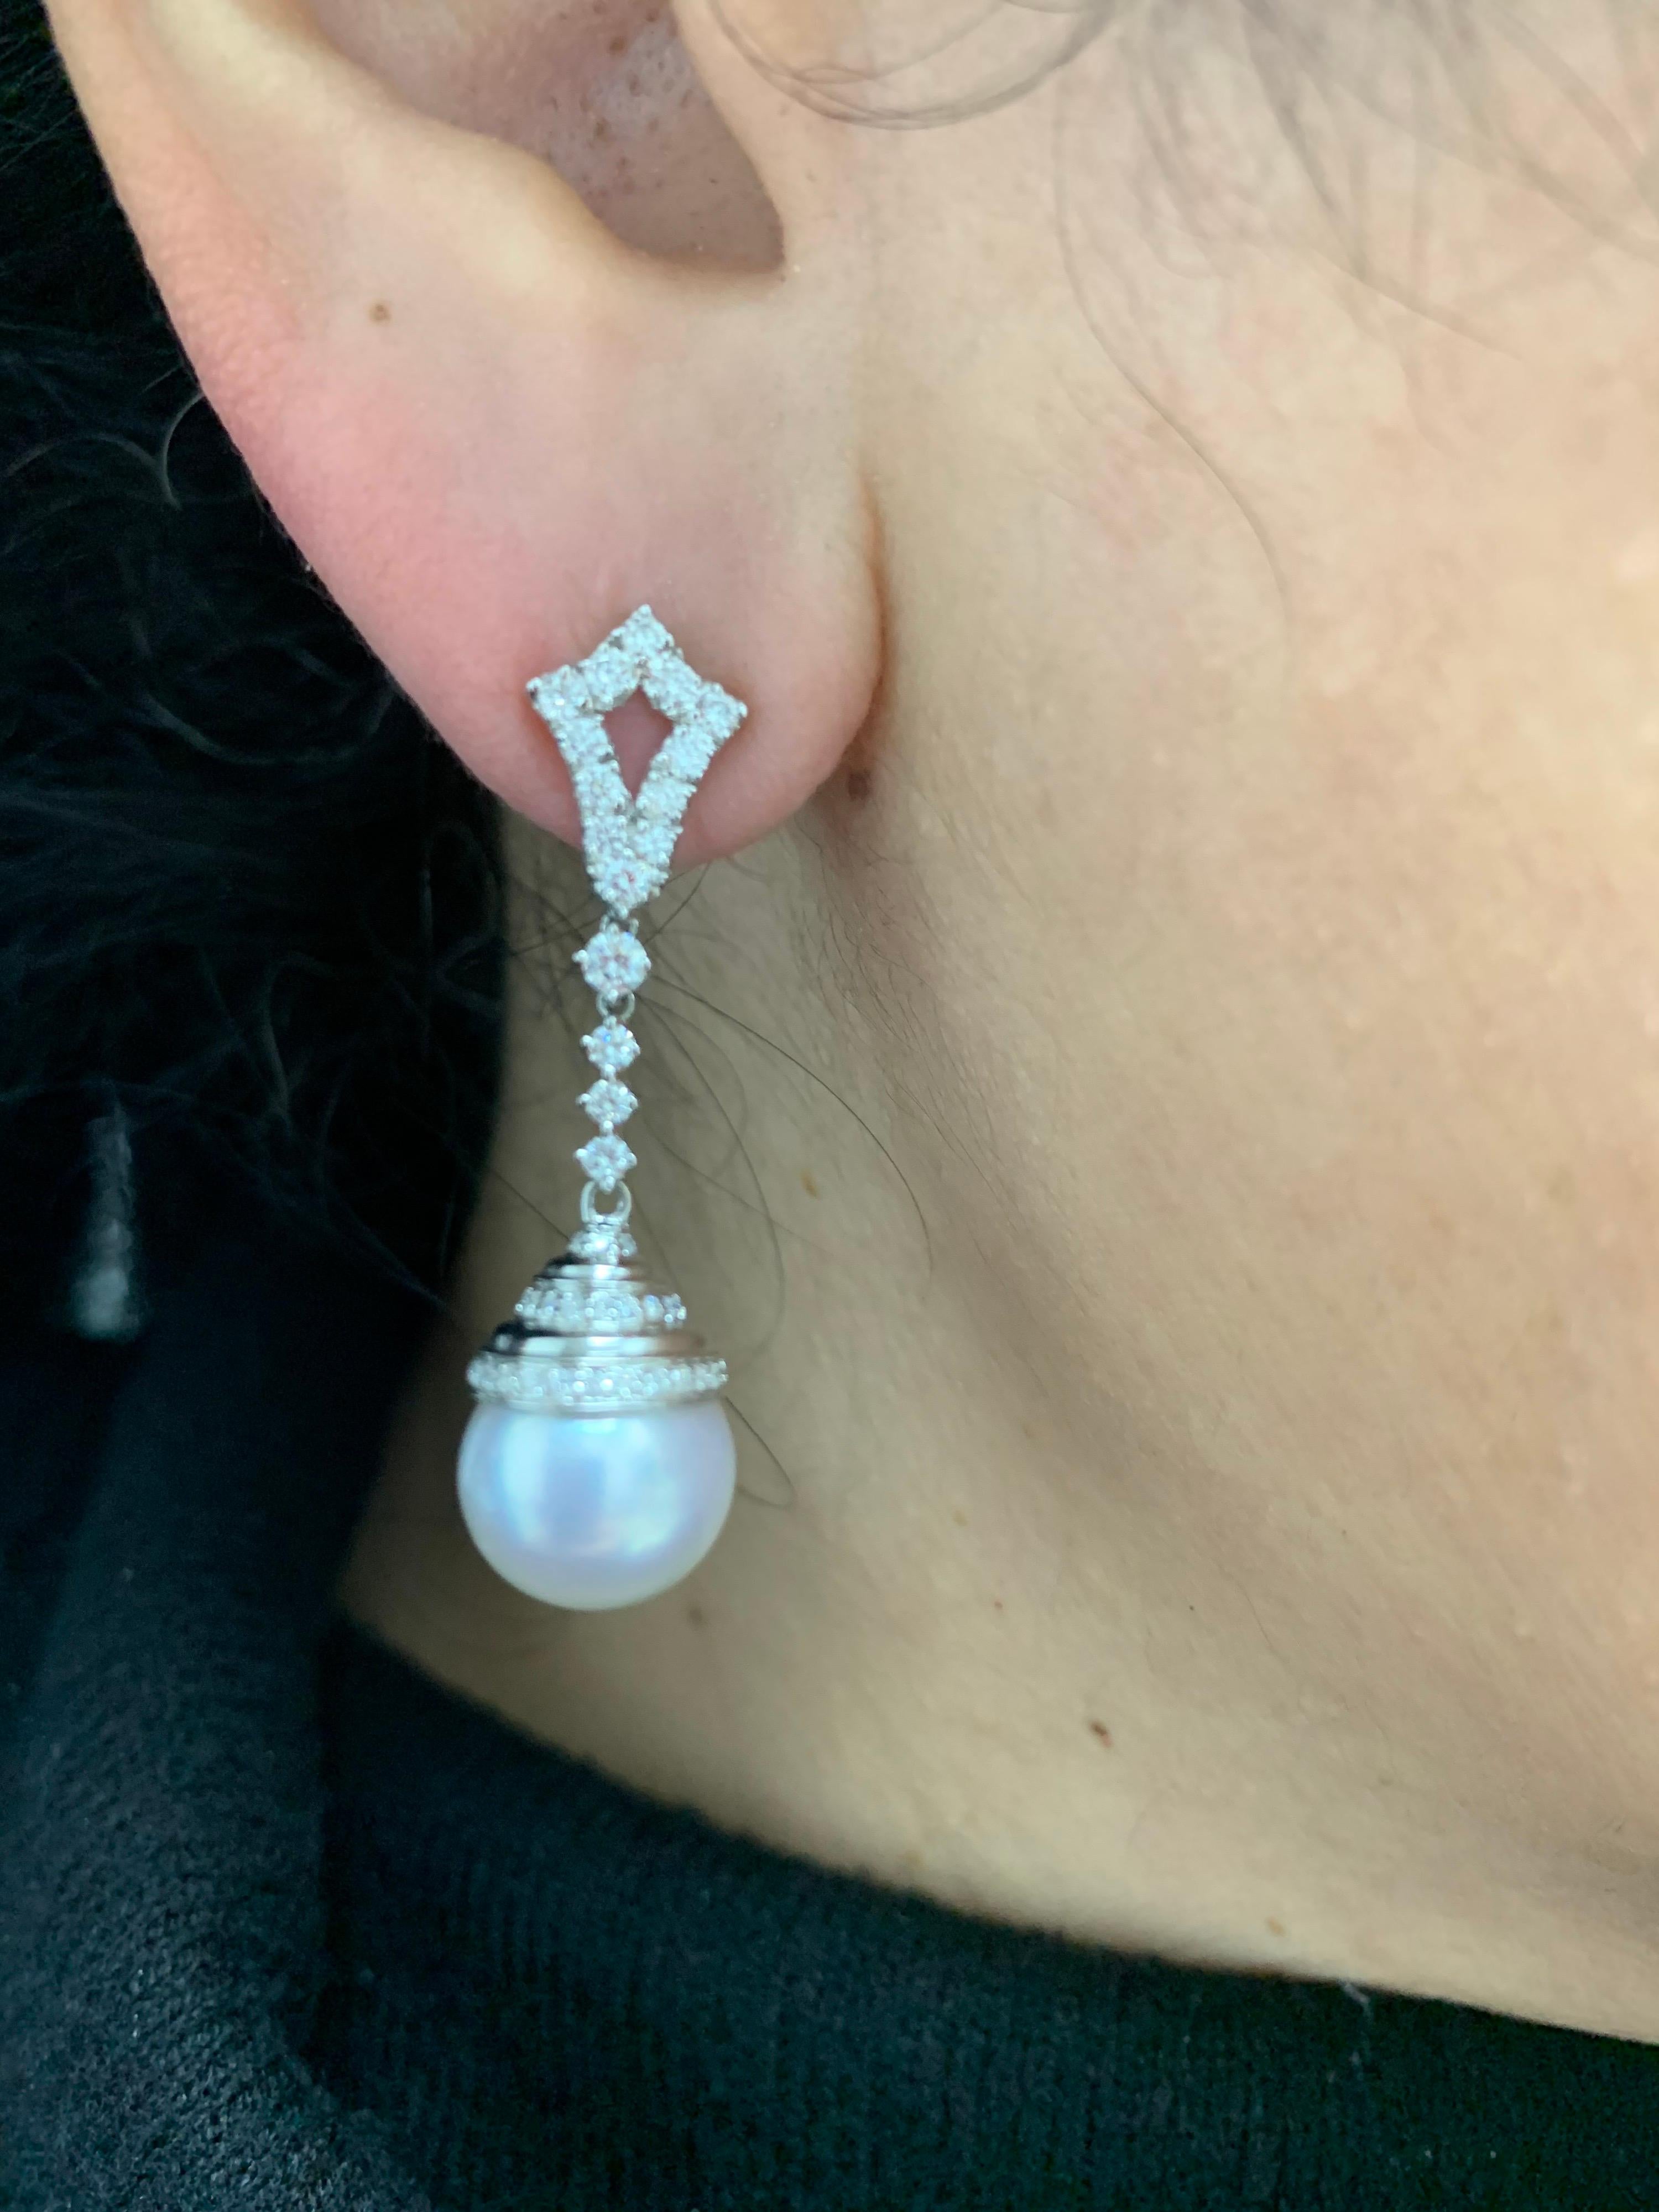 18K White gold drop earrings featuring two South Sea pearls measuring 11-12 mm with 82 round brilliants weighing 0.90 carats.

Pearl Quality	AAA
Luster	AAA, Excellent
Nacre	Very Thick